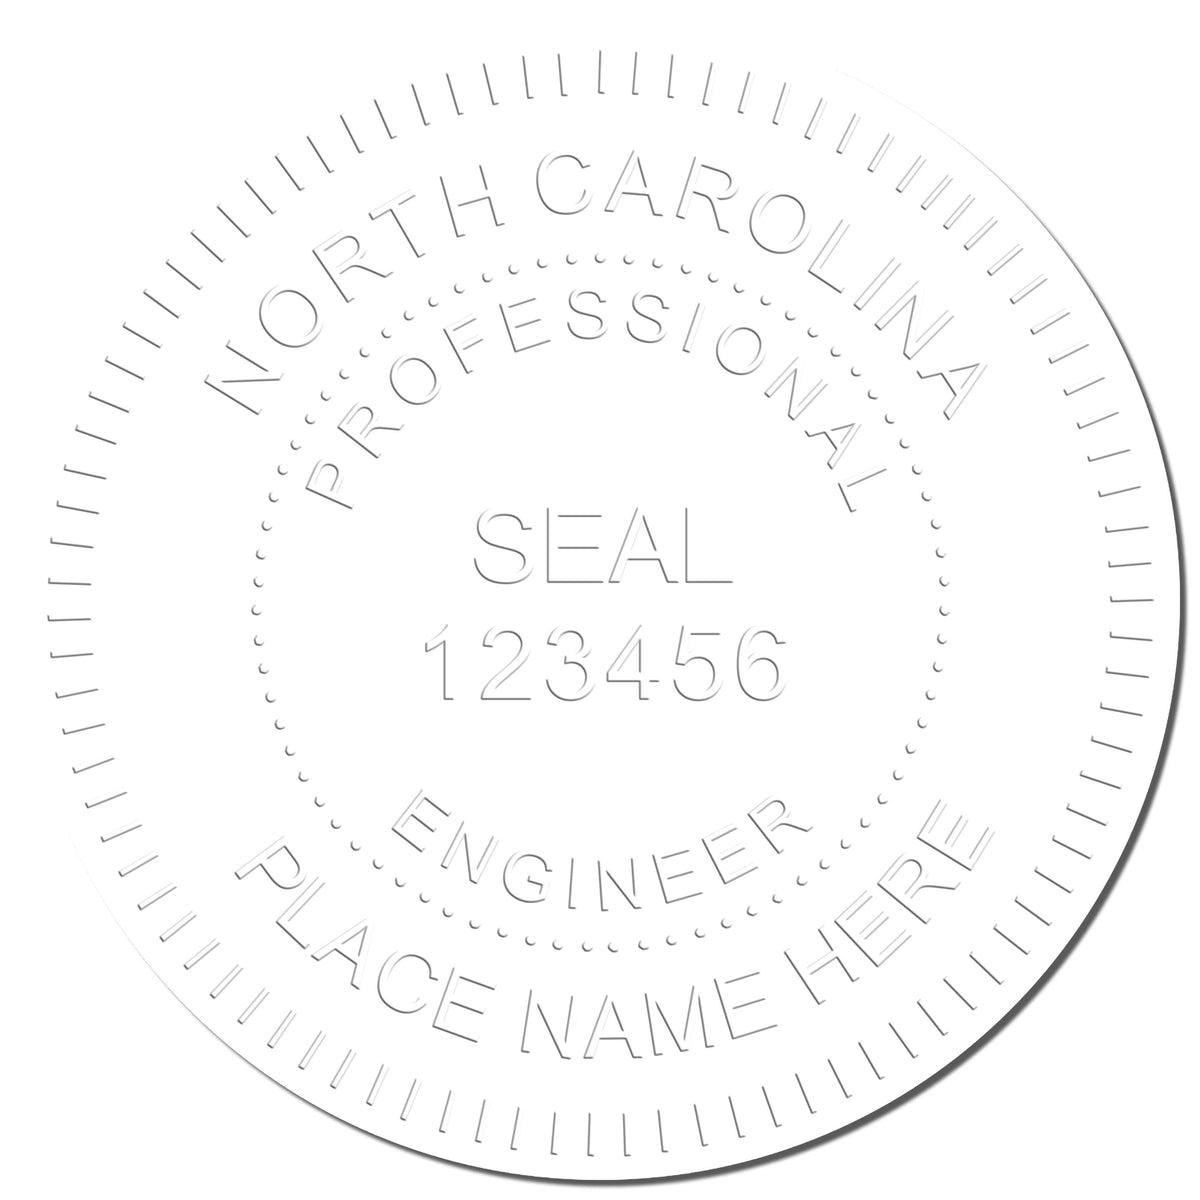 The Soft North Carolina Professional Engineer Seal stamp impression comes to life with a crisp, detailed photo on paper - showcasing true professional quality.